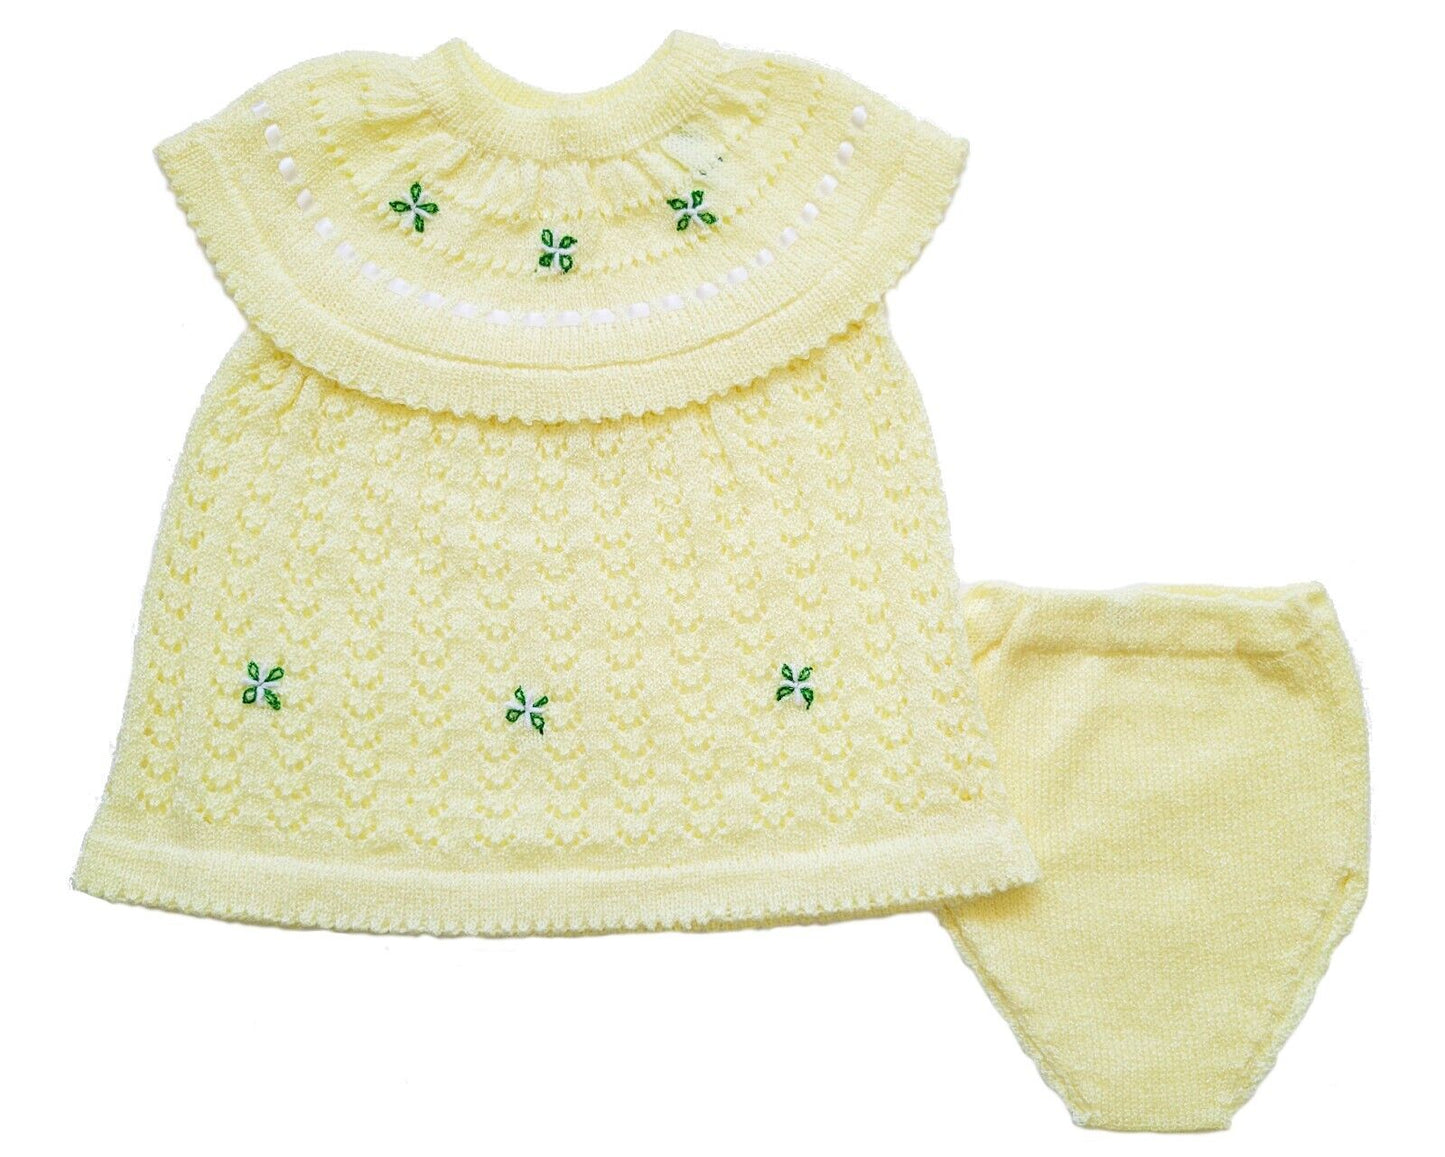 Wholesale Newborn Baby Girl Crochet Sweater Dress and Diaper Cover 2 Piece Outfit Set